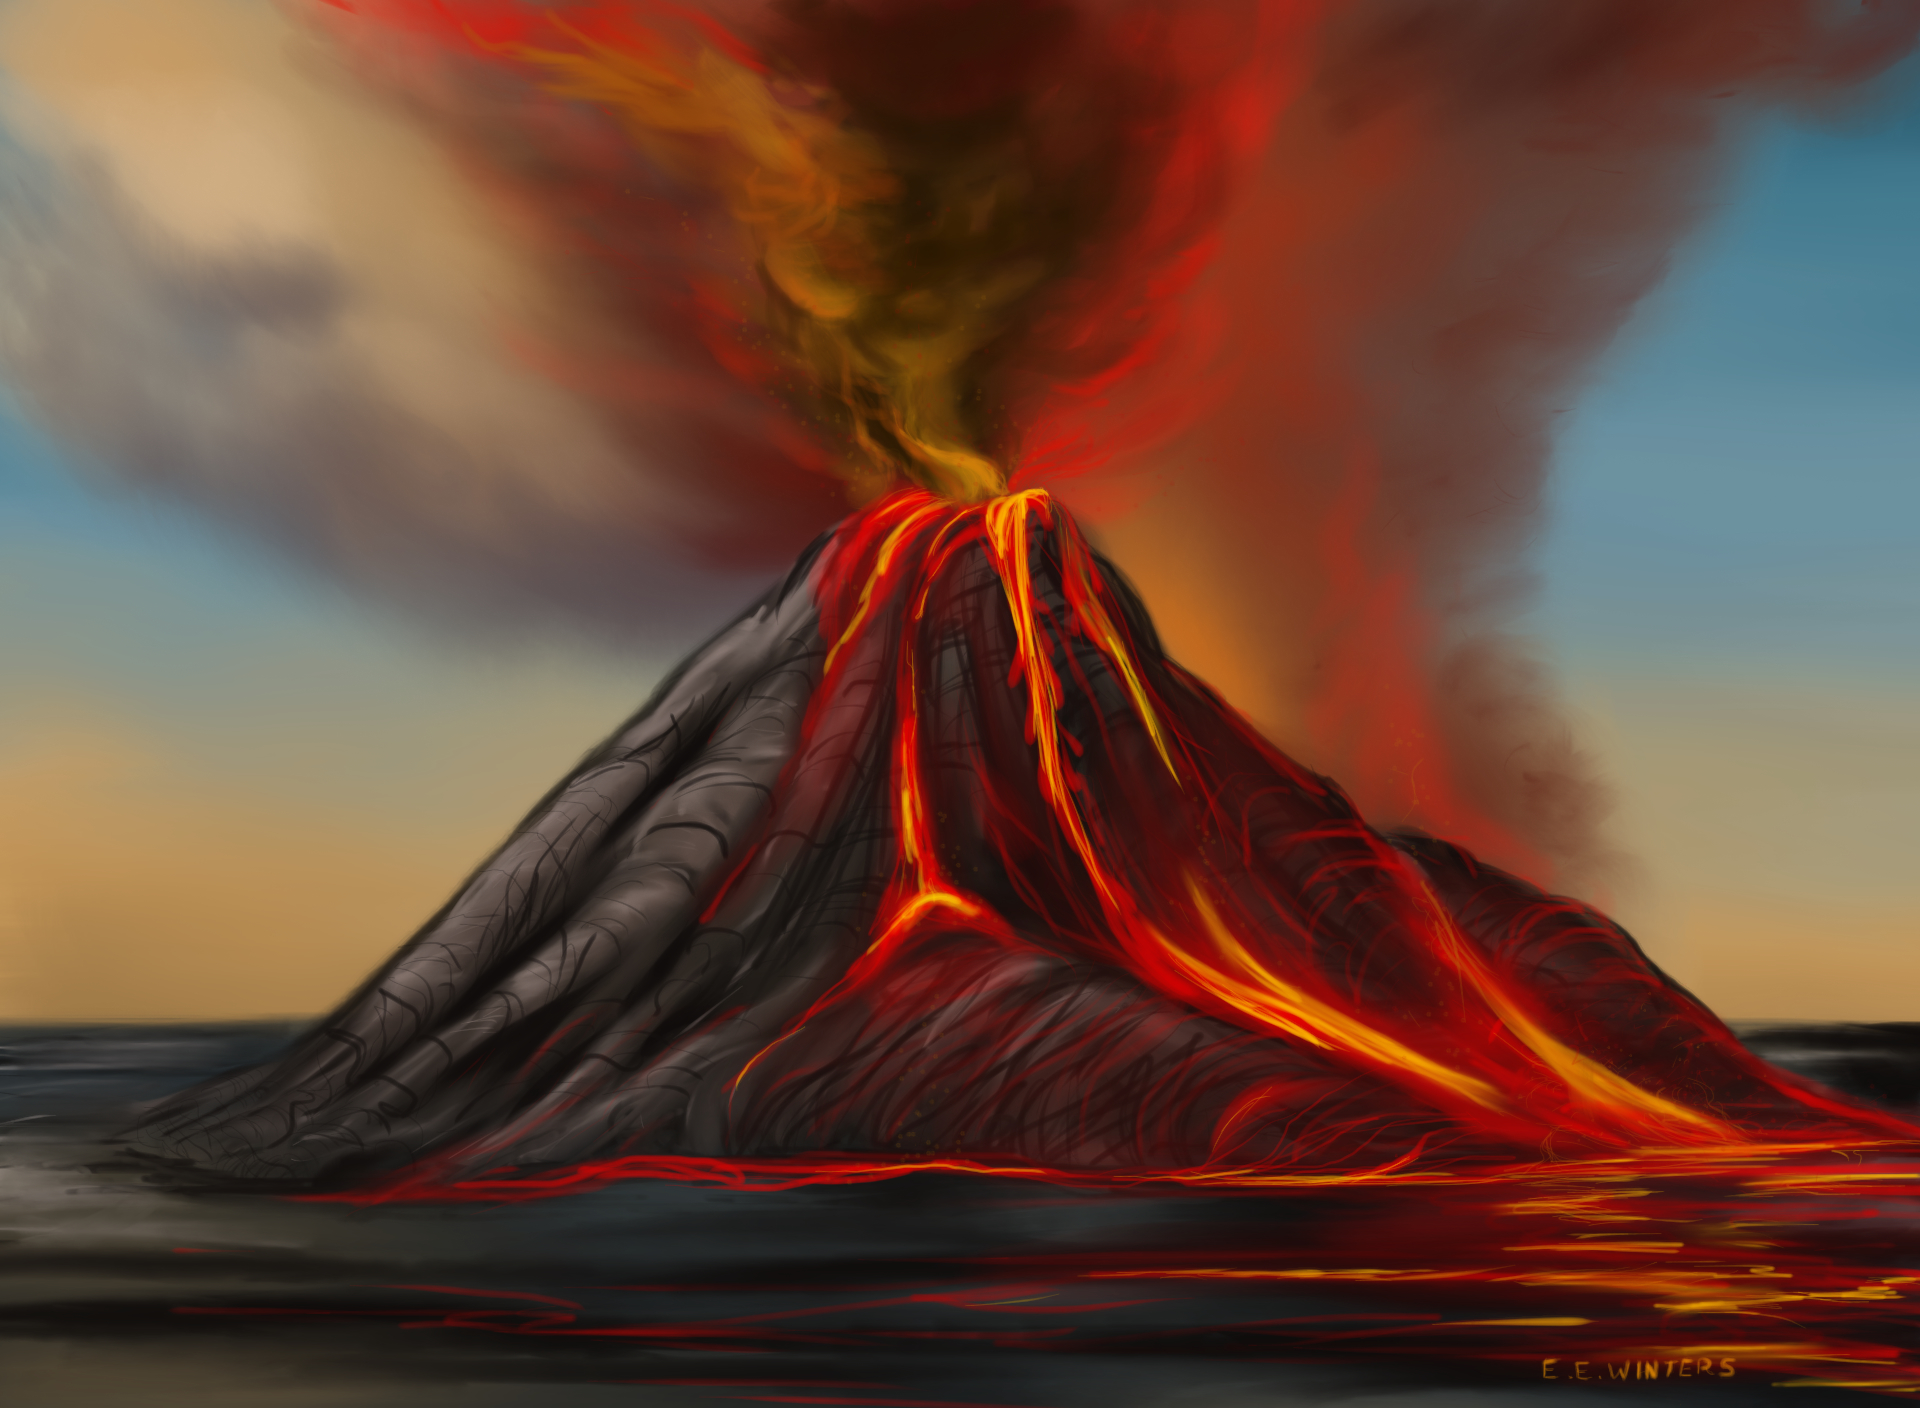 Volcano by EEWinters on Clipart library